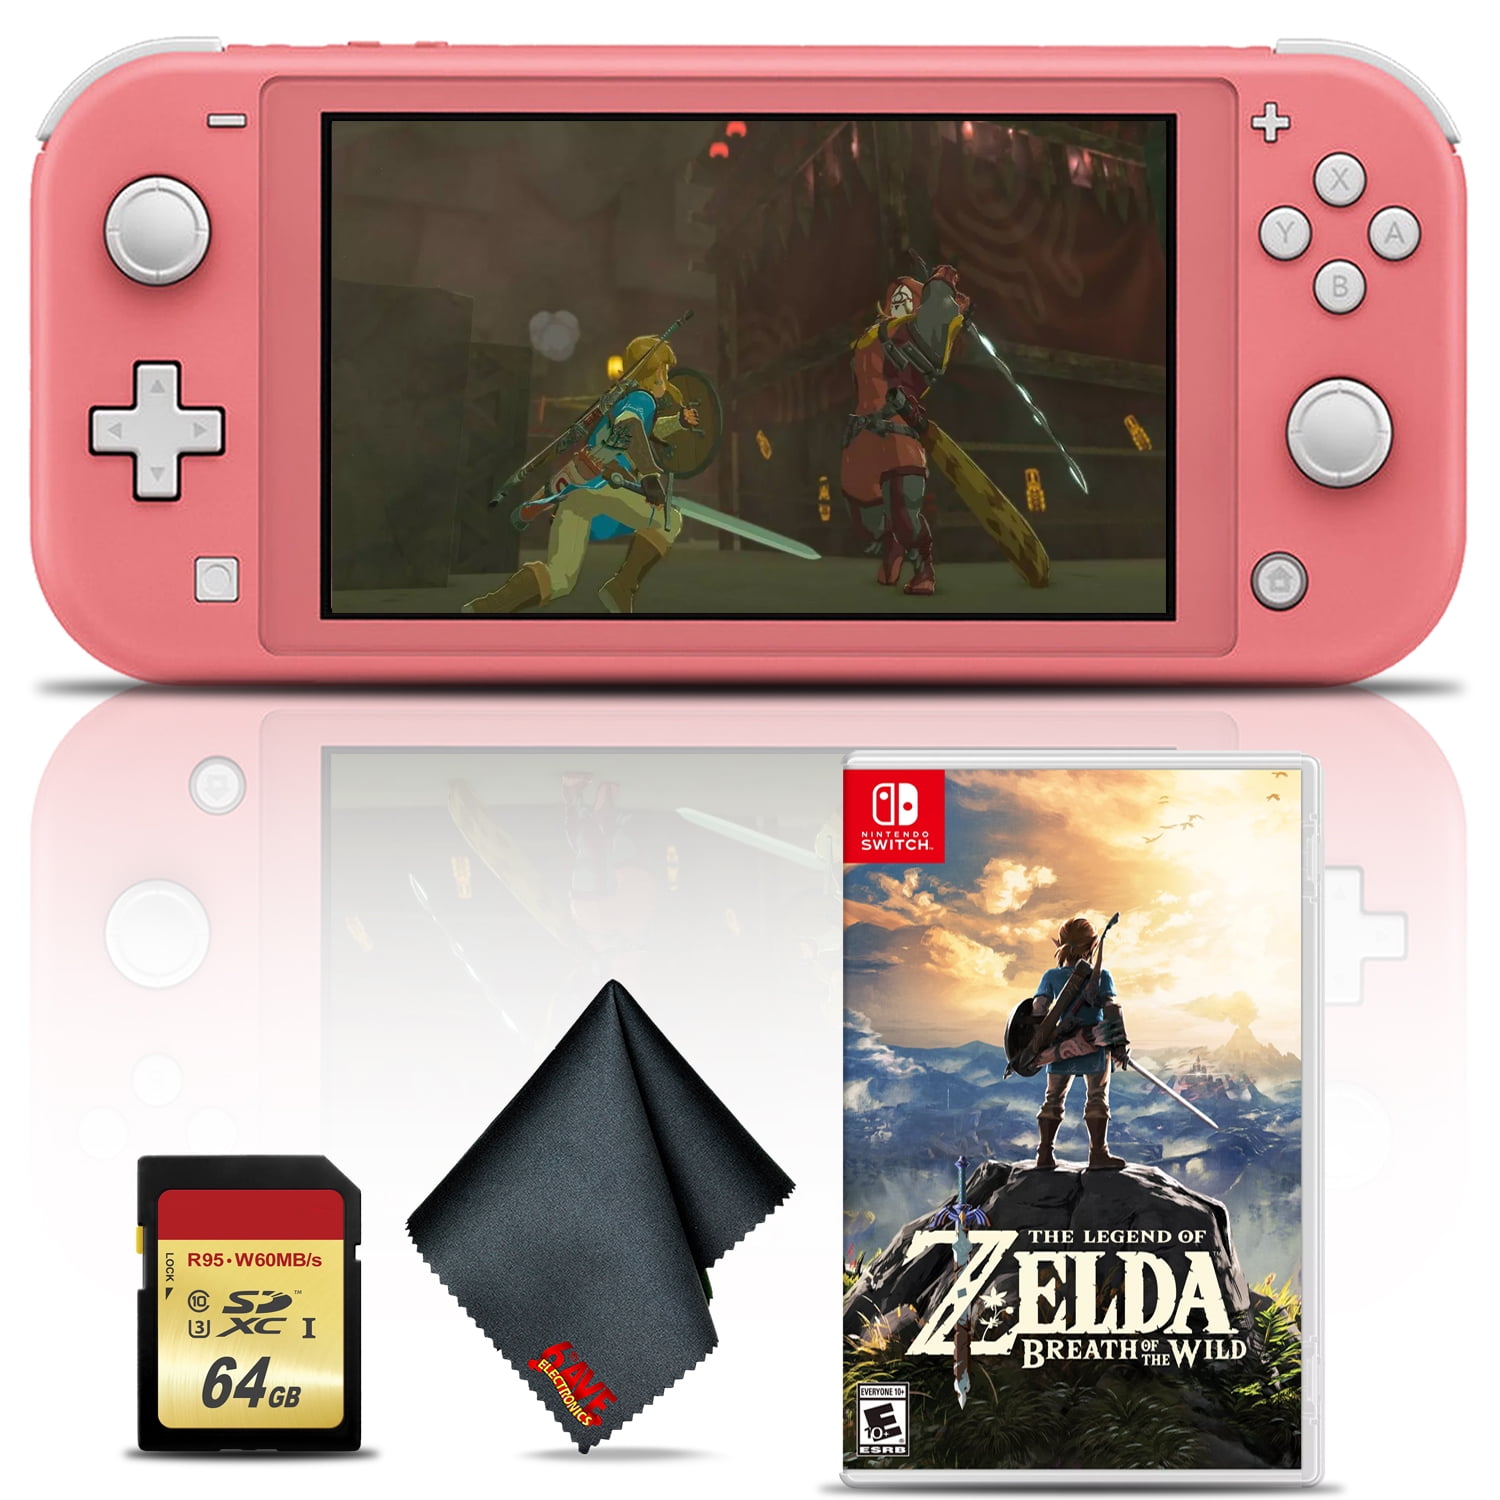 Nintendo Switch Lite (Coral) with Zelda: of the Wild and 64GB - Walmart.com